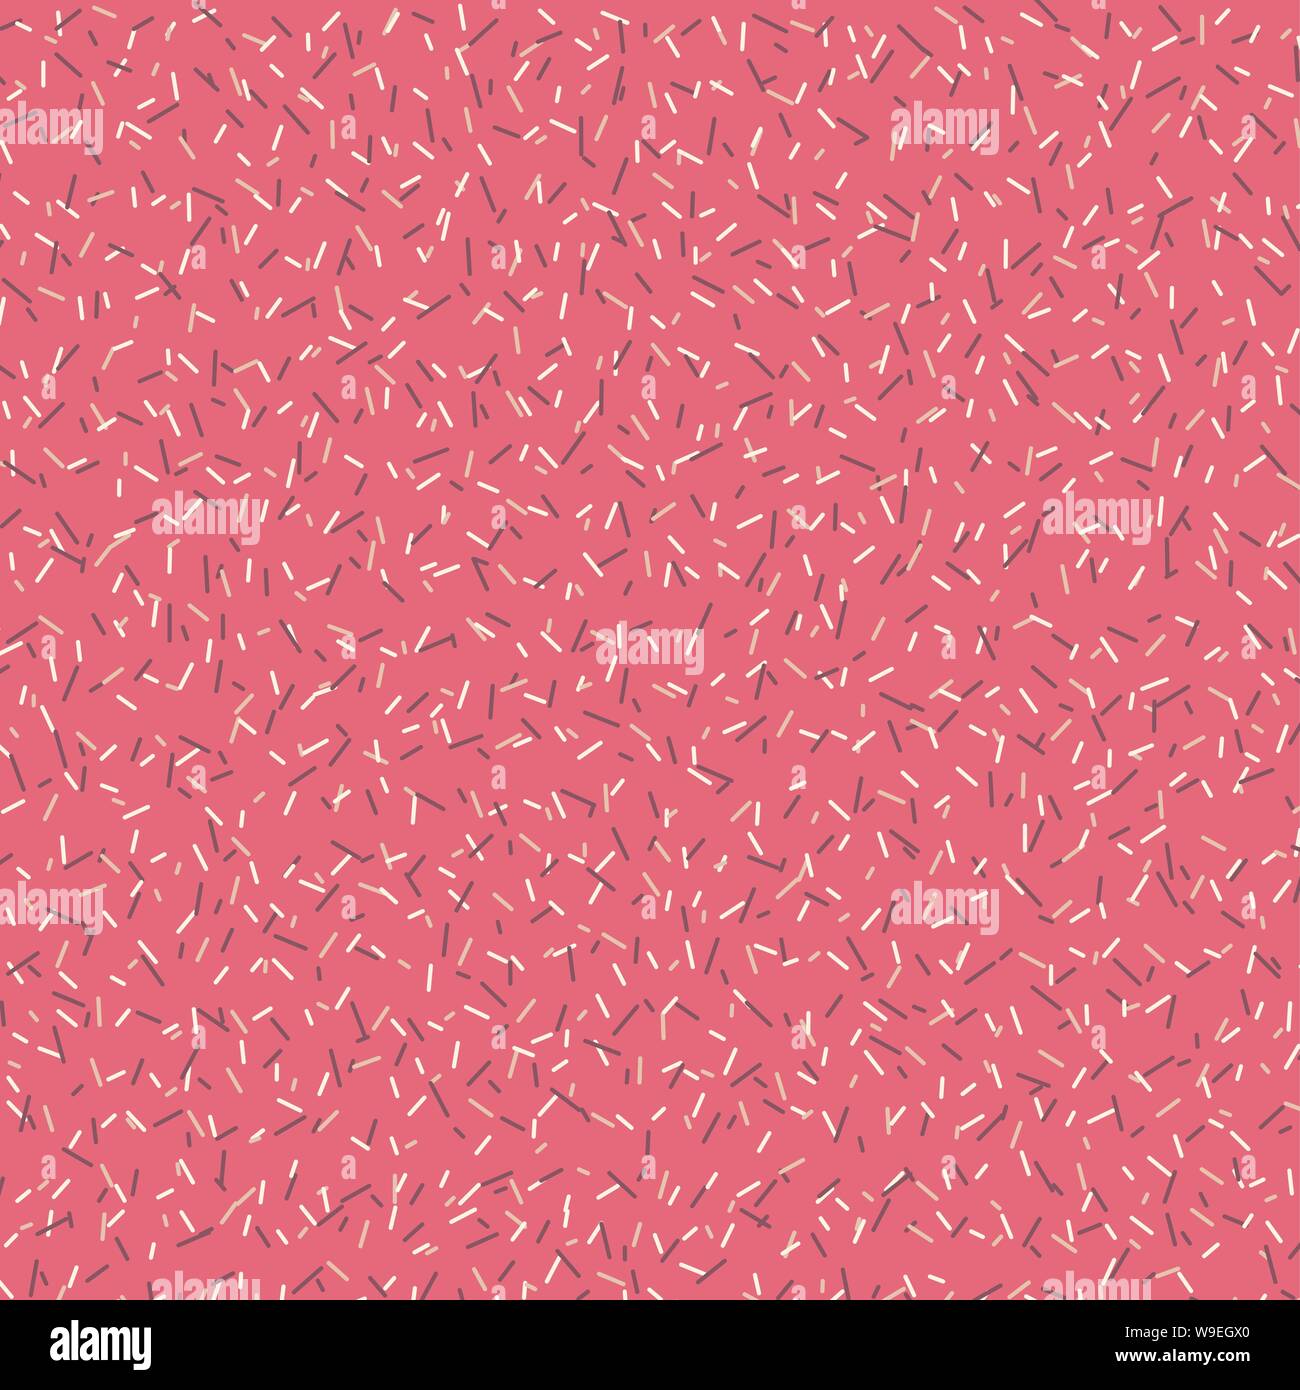 Eye-catching abstract patterns design with red background. Website background. Stock Vector